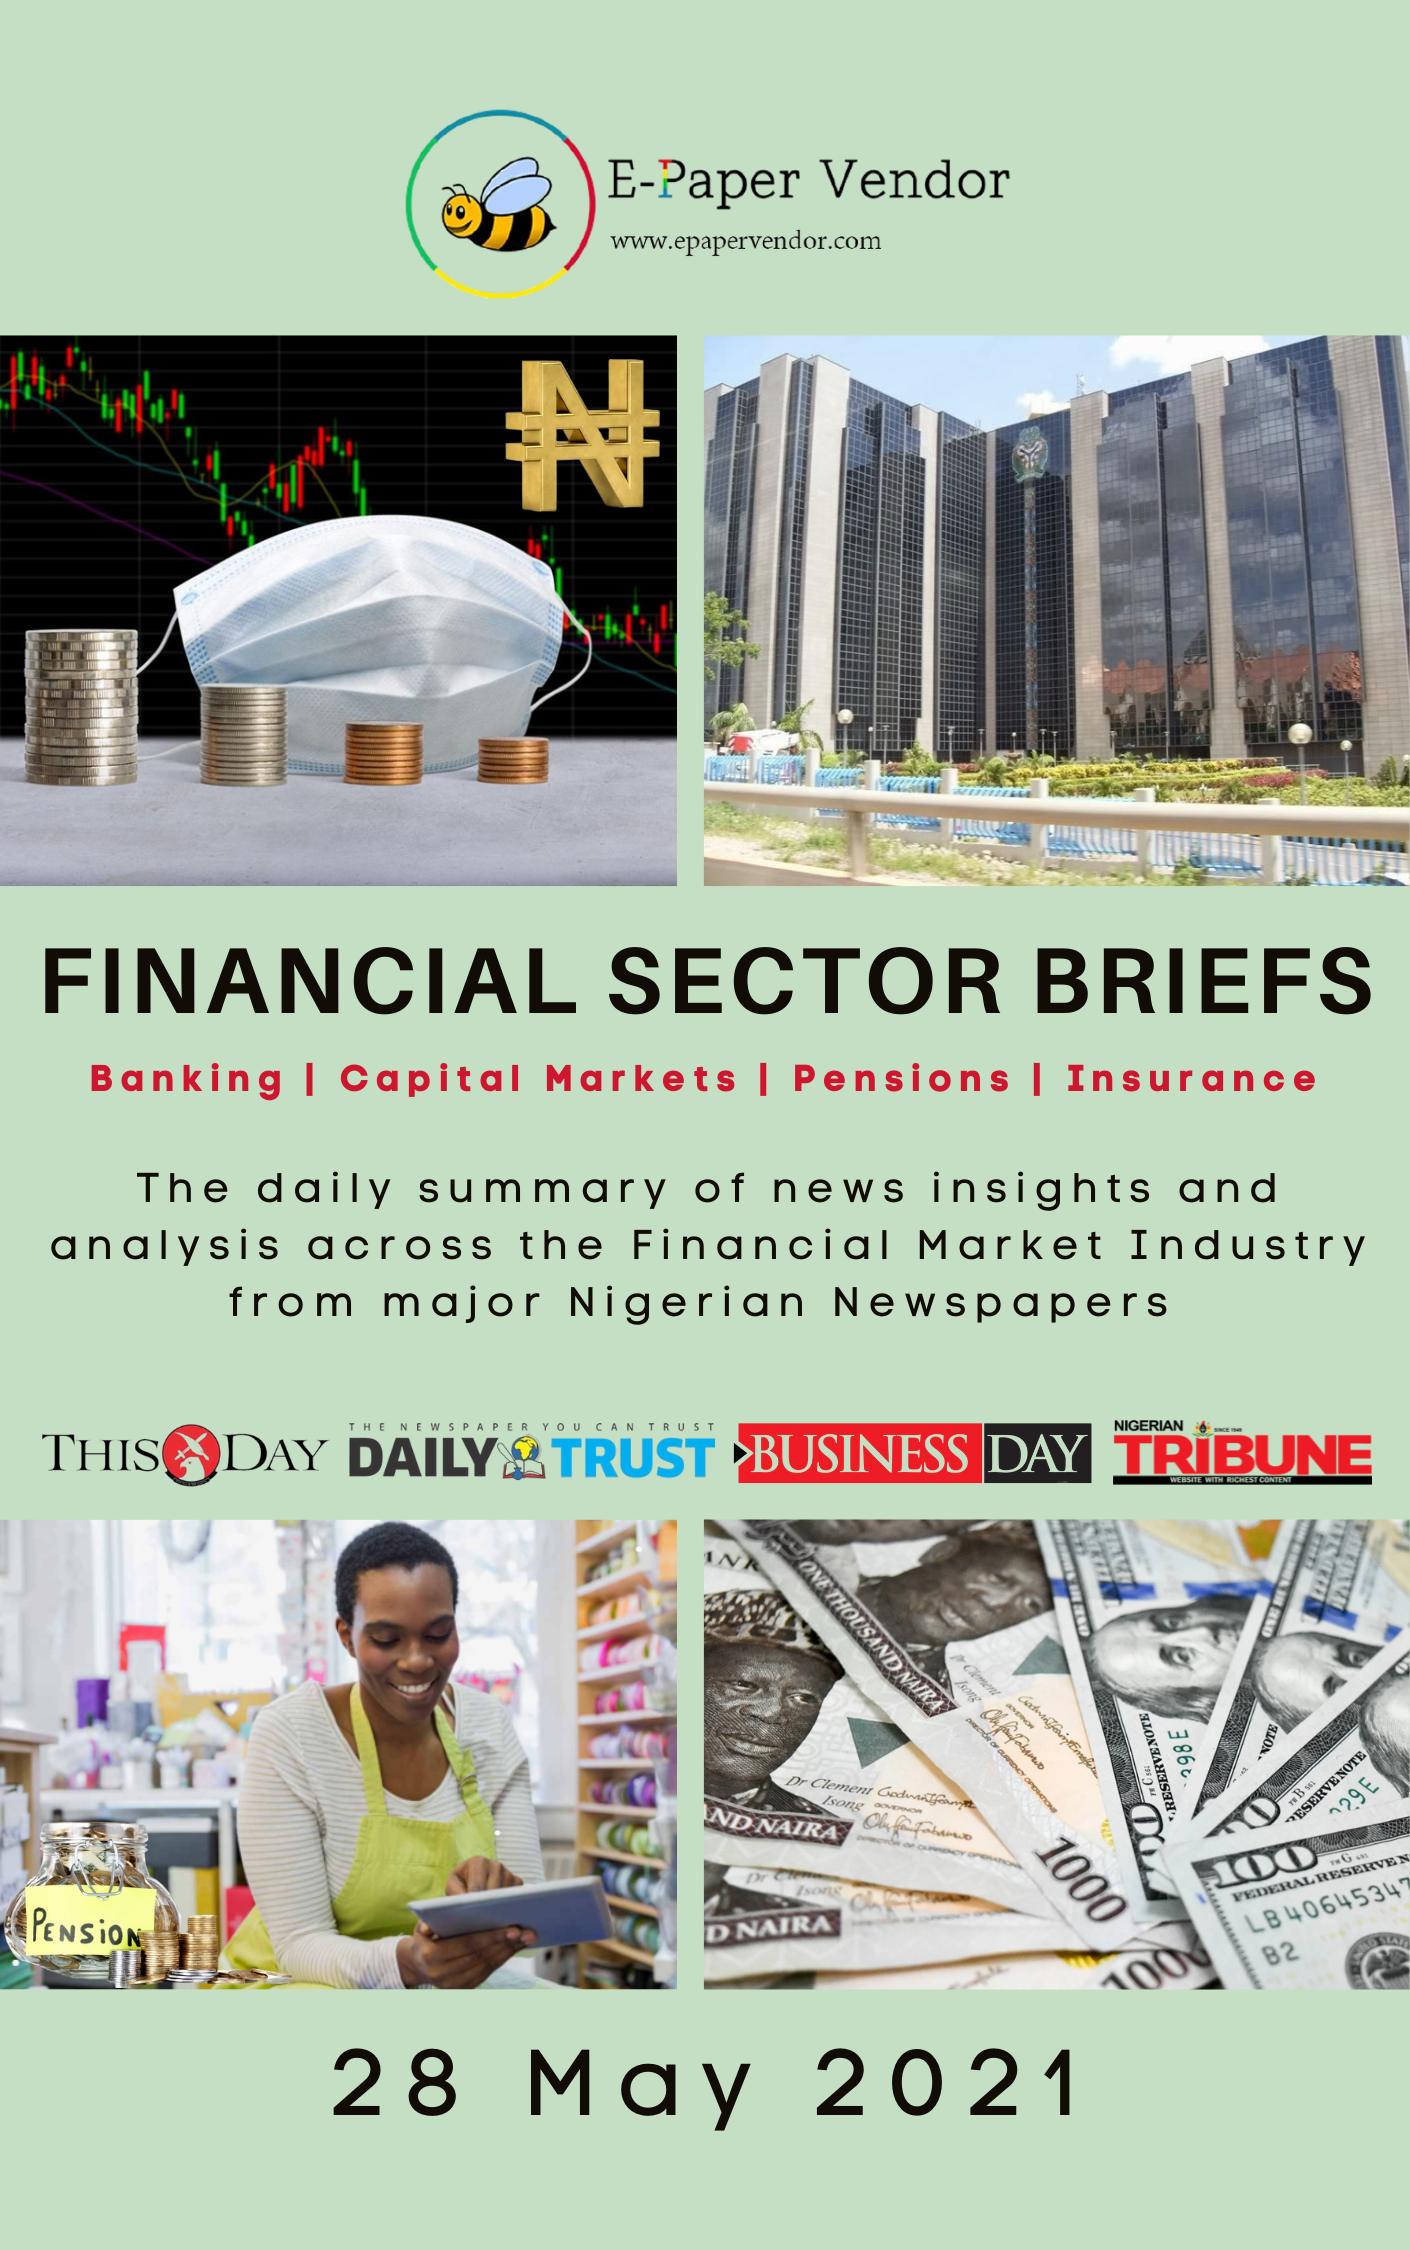 FINANCIAL SECTOR BRIEFS (28 MAY 2021)